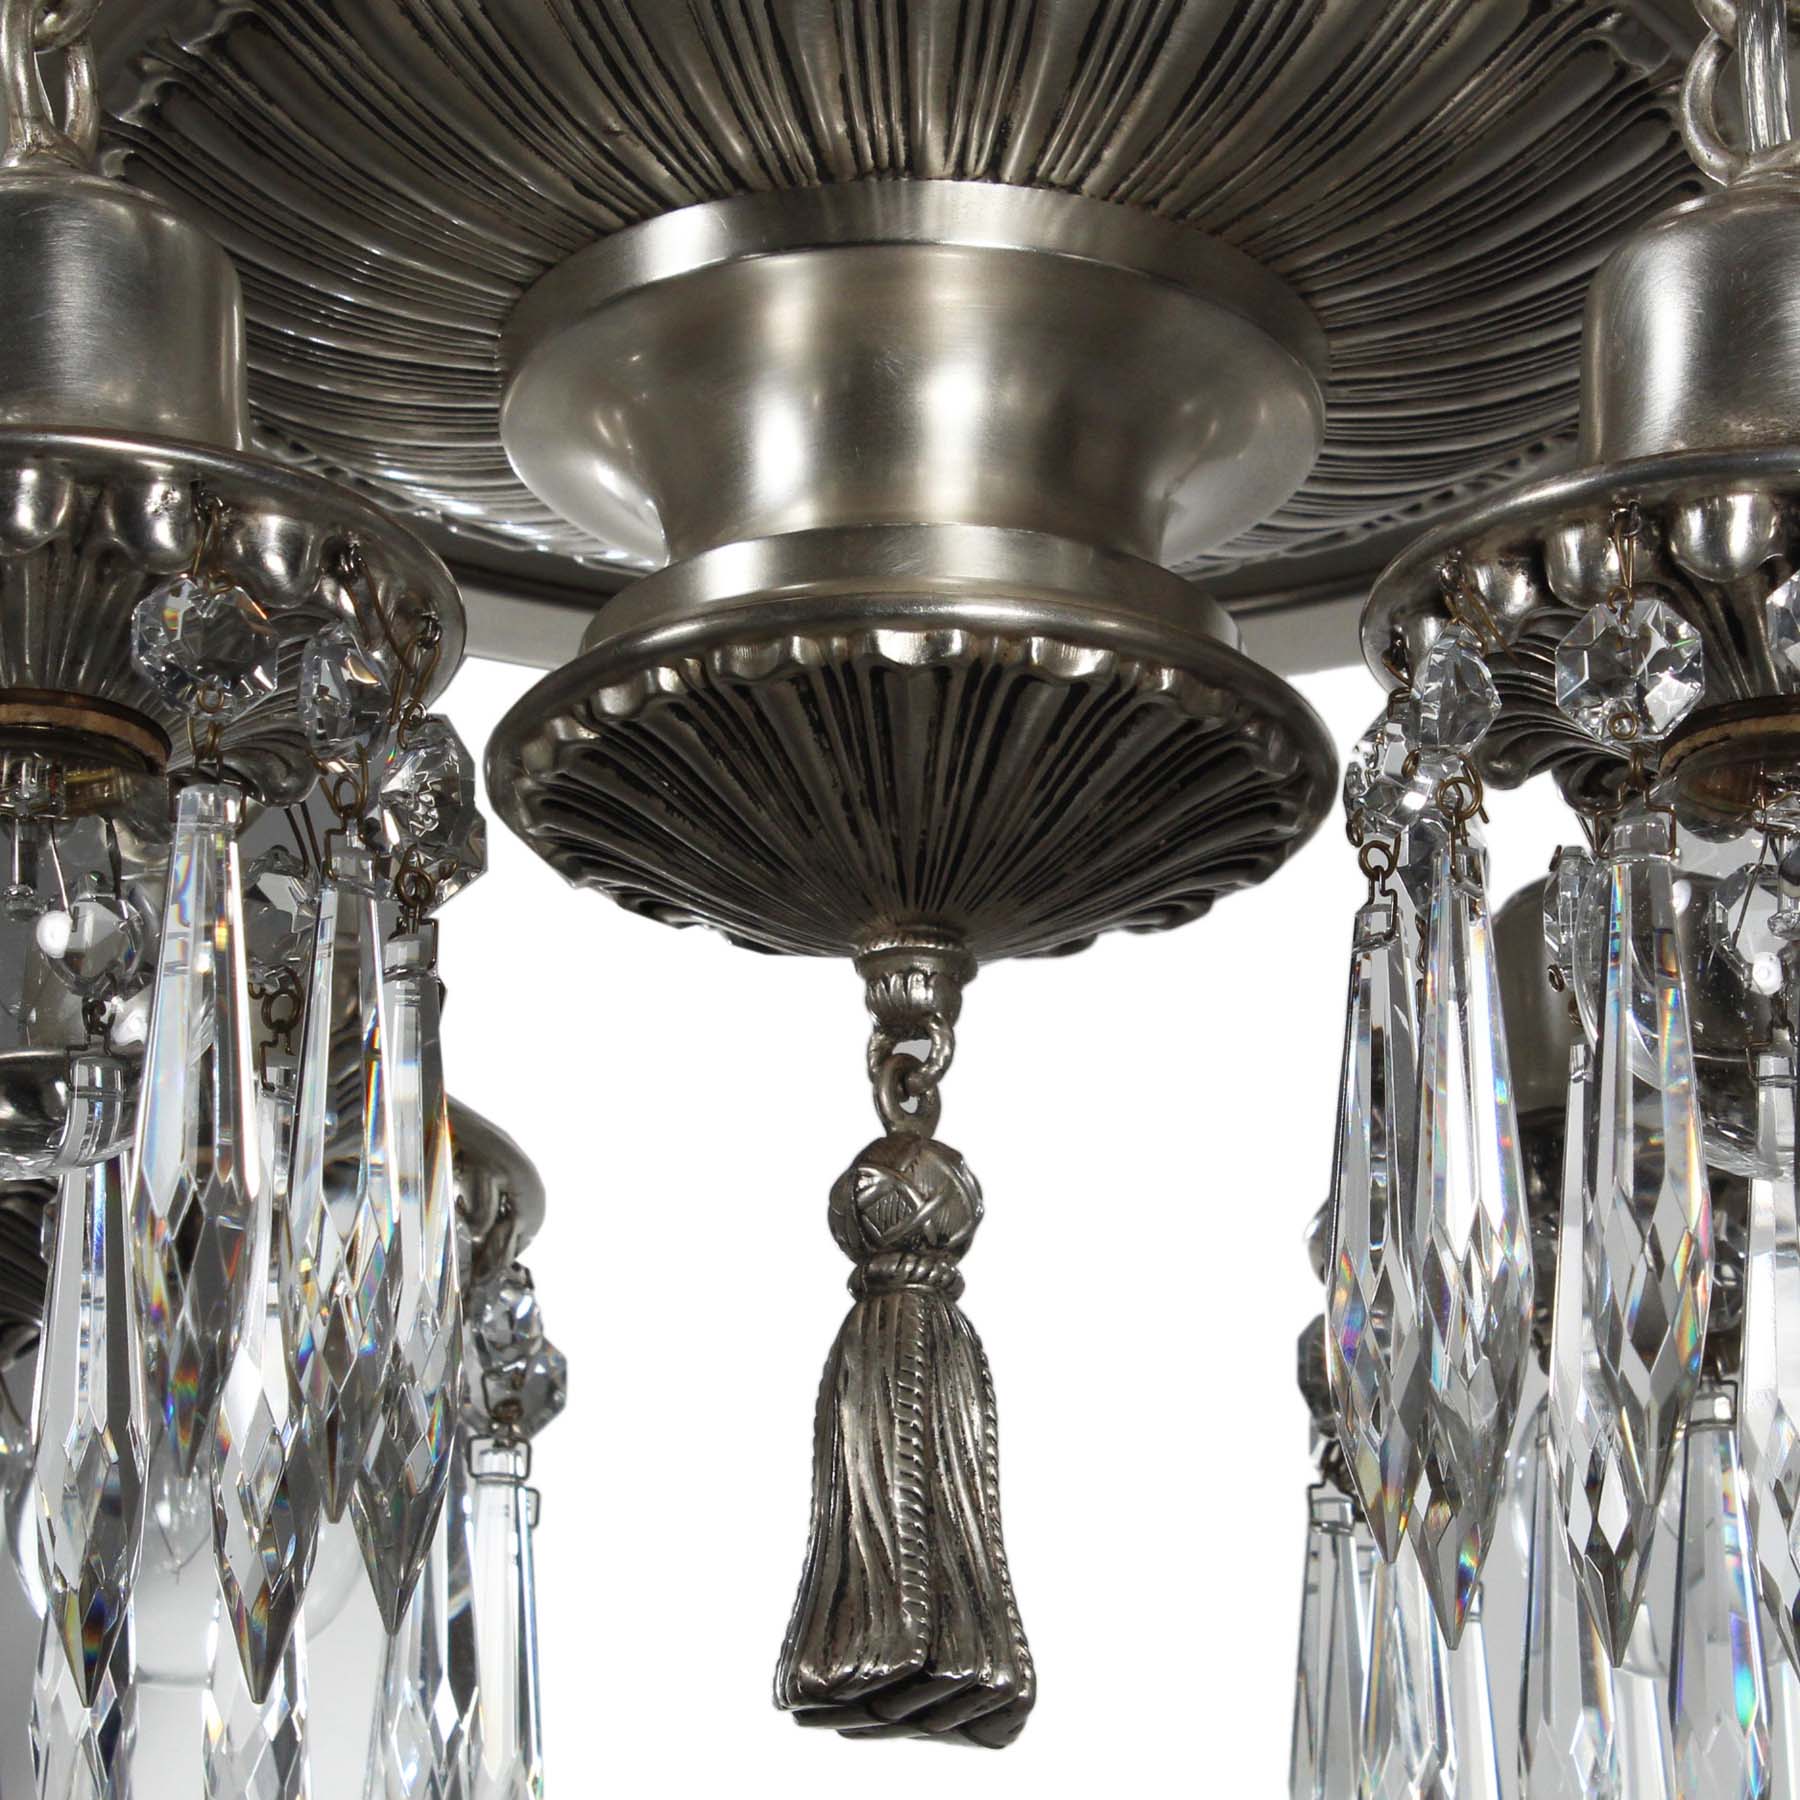 SOLD Neoclassical Silver Plated Chandelier with Prisms, Antique Lighting-69786